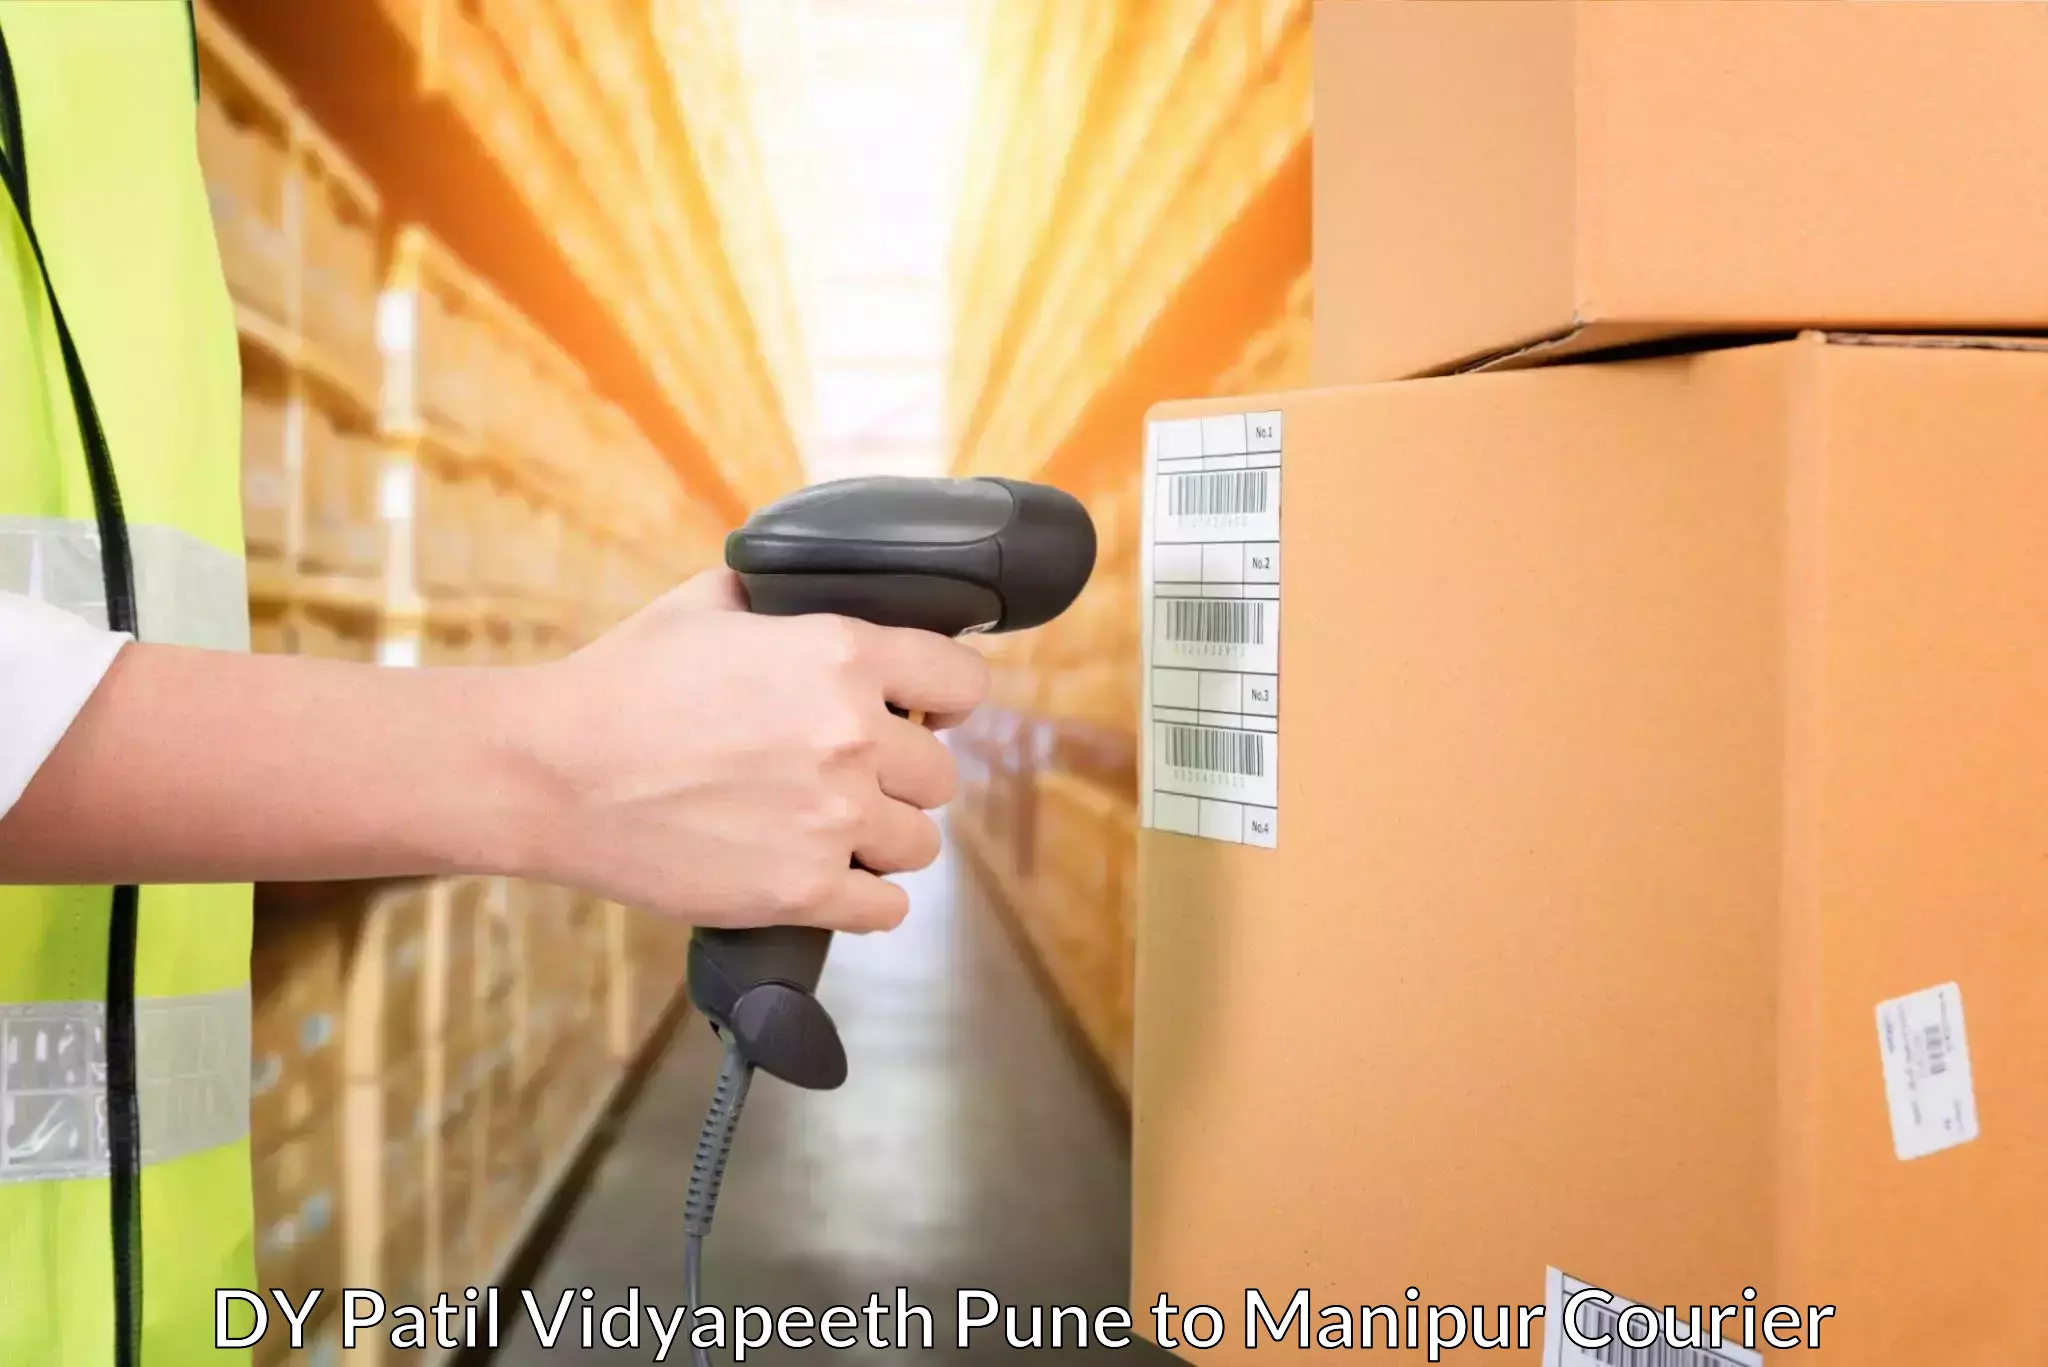 Courier service efficiency in DY Patil Vidyapeeth Pune to Manipur